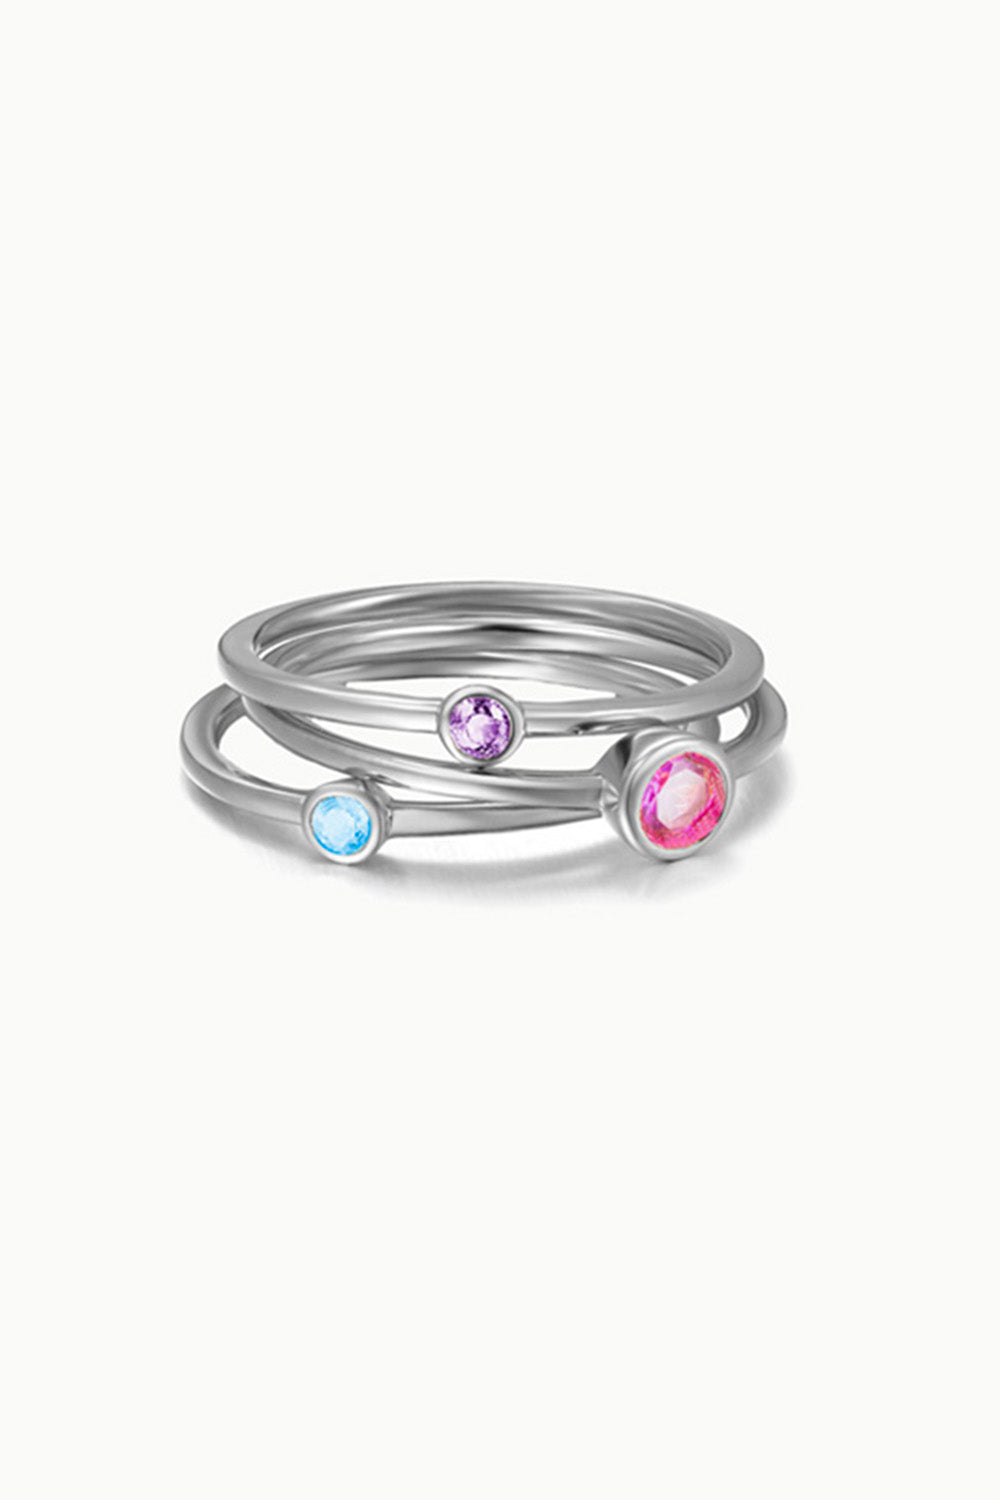 Stackable Sterling Silver Rings Set of 3